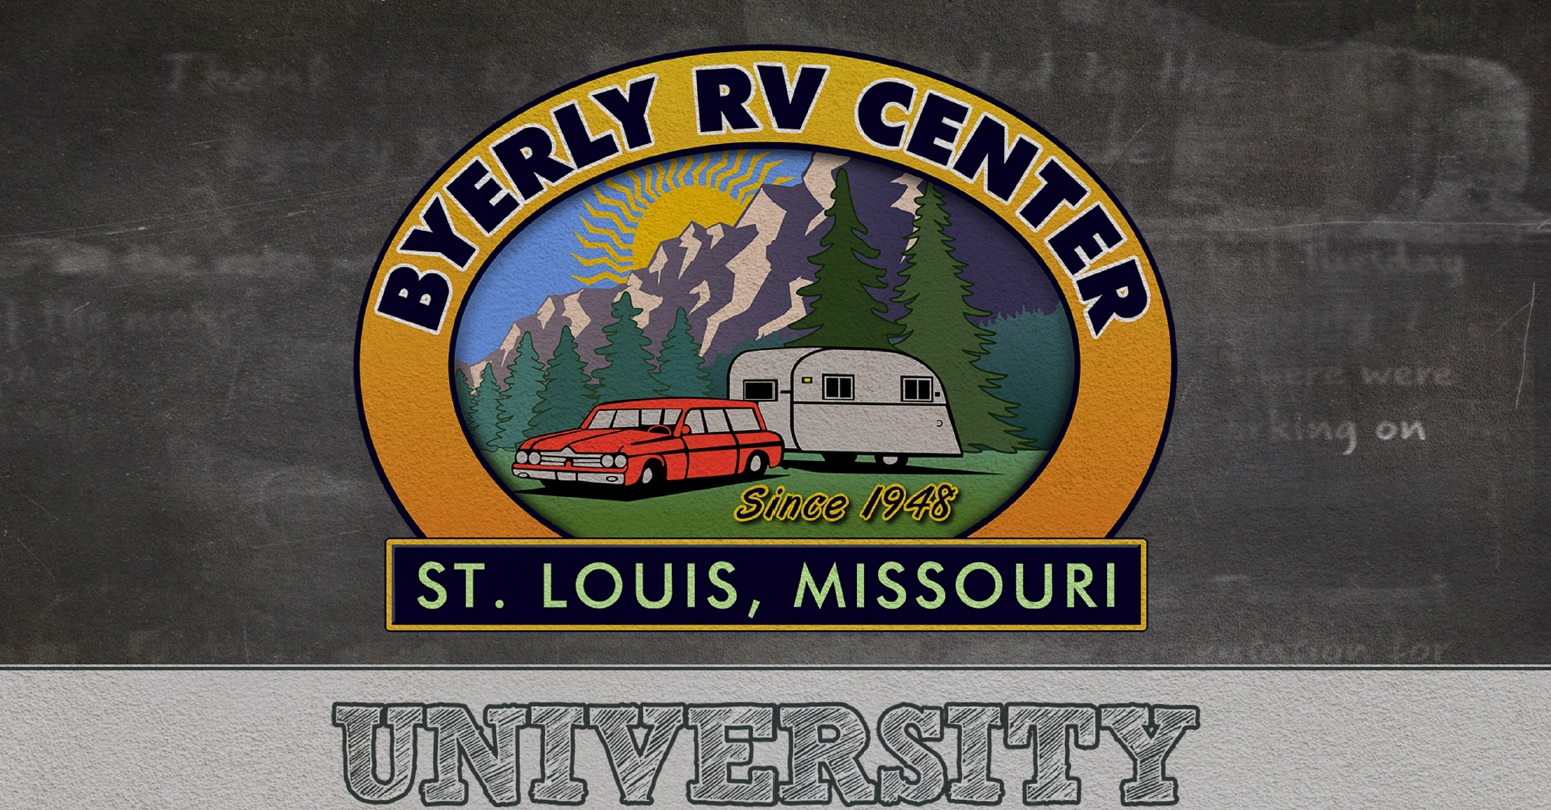 Byerly RV in Eureka, Missouri offers monthly classes to help RVers and consumers get educated on RVs and the RV lifestyle